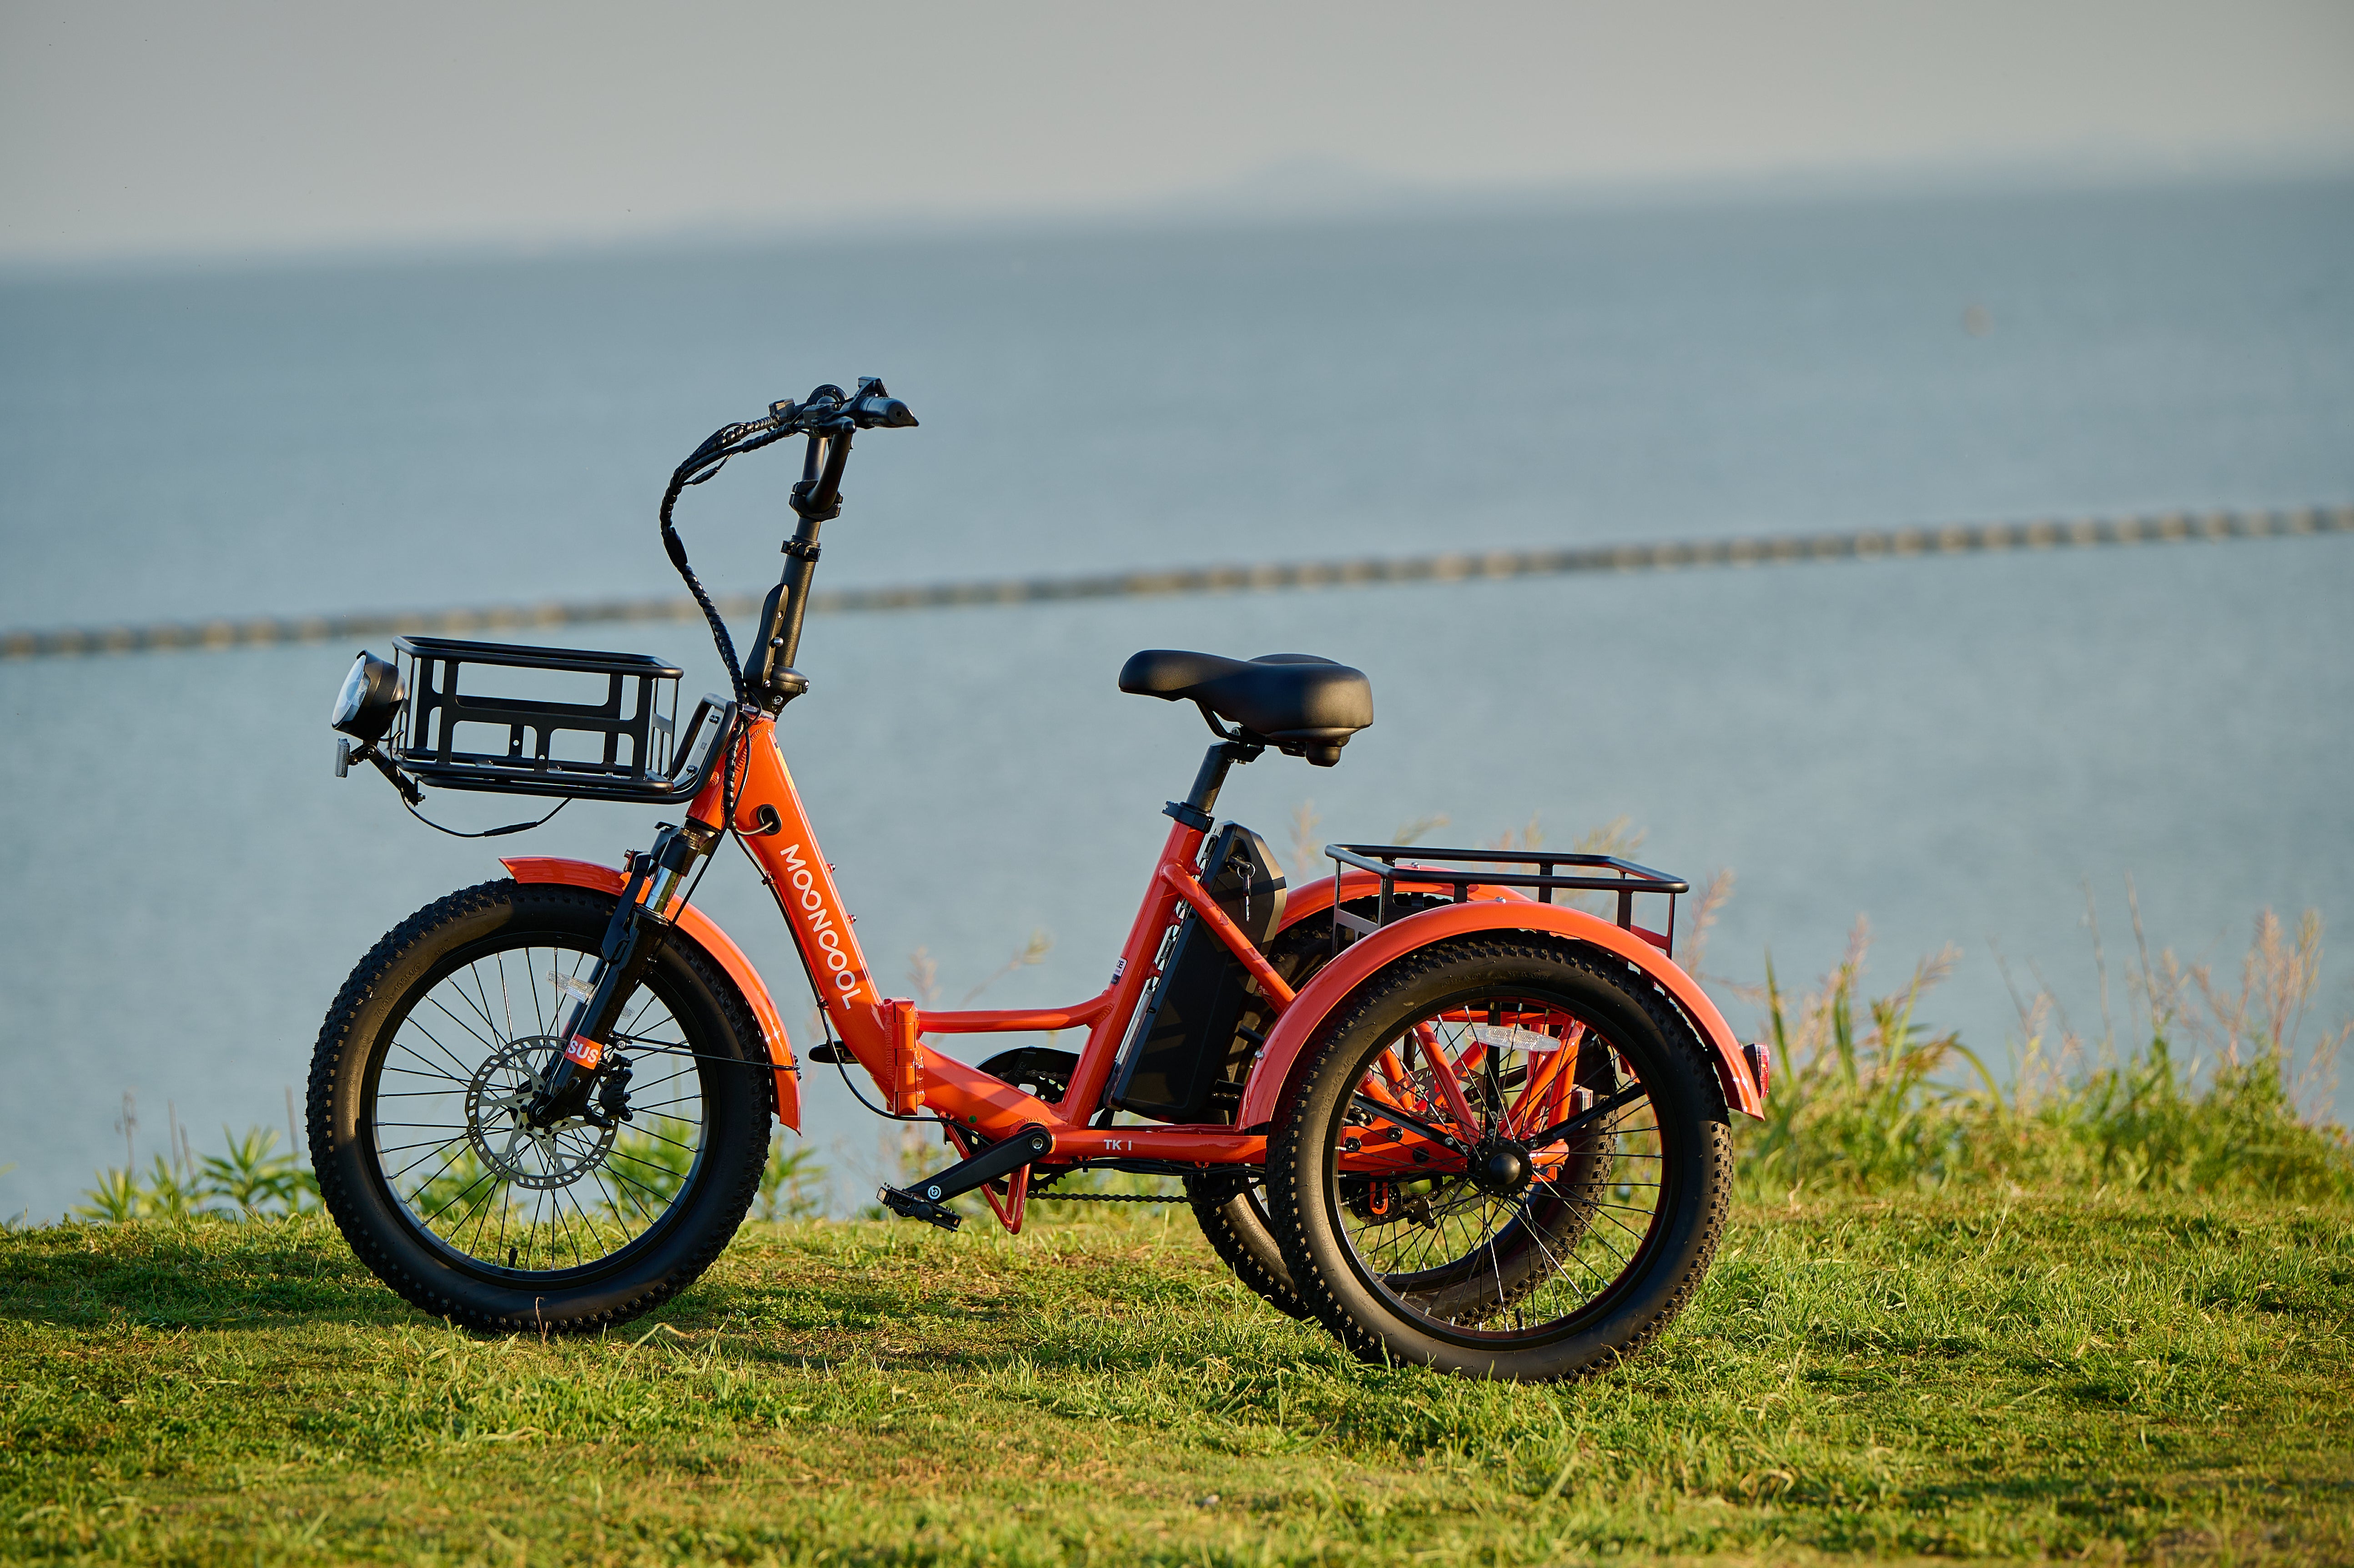 Up-Close with the Mooncool TK1 Folding Electric Trike